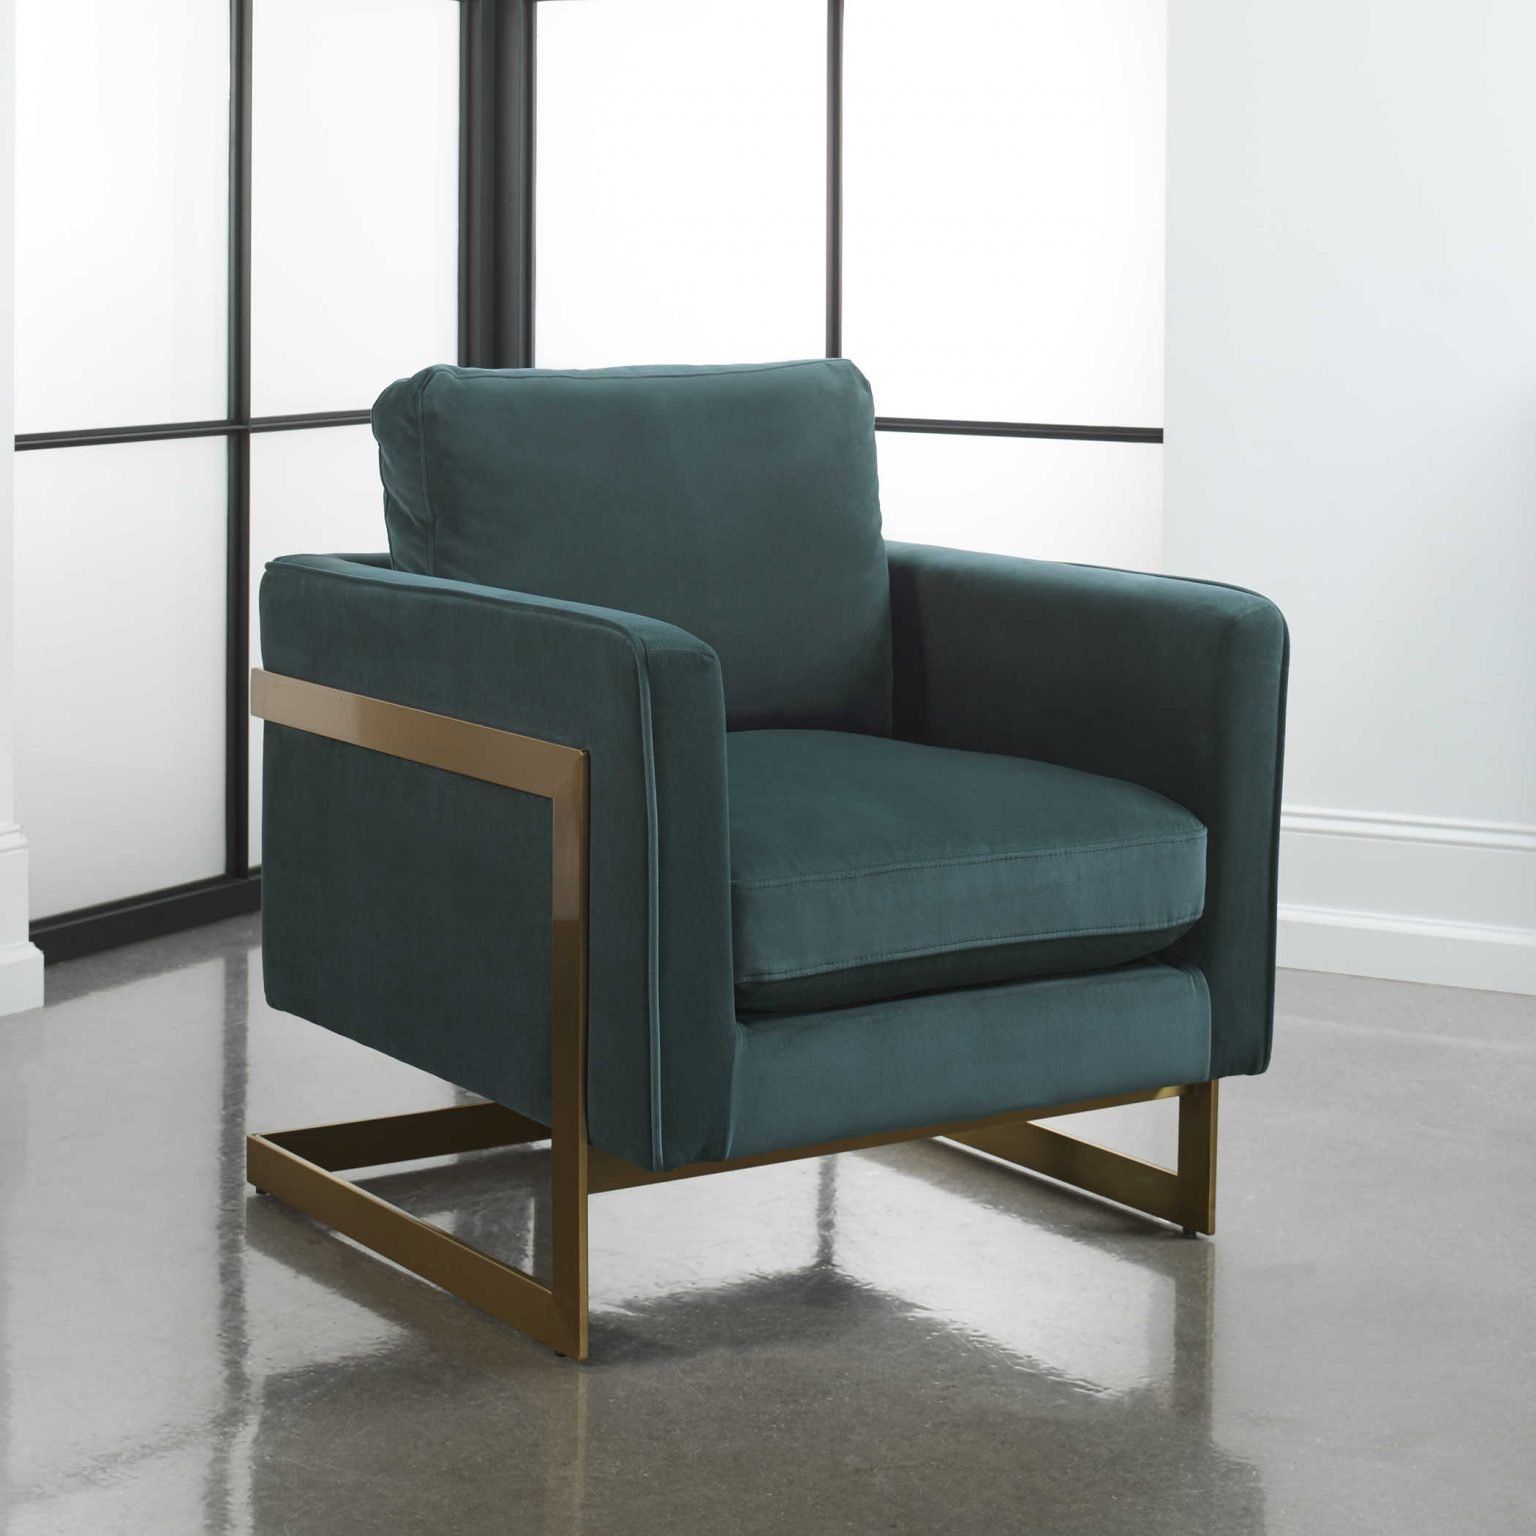 Teal, art deco revival chair with square lines - perfect for 2021 interior design and color trends